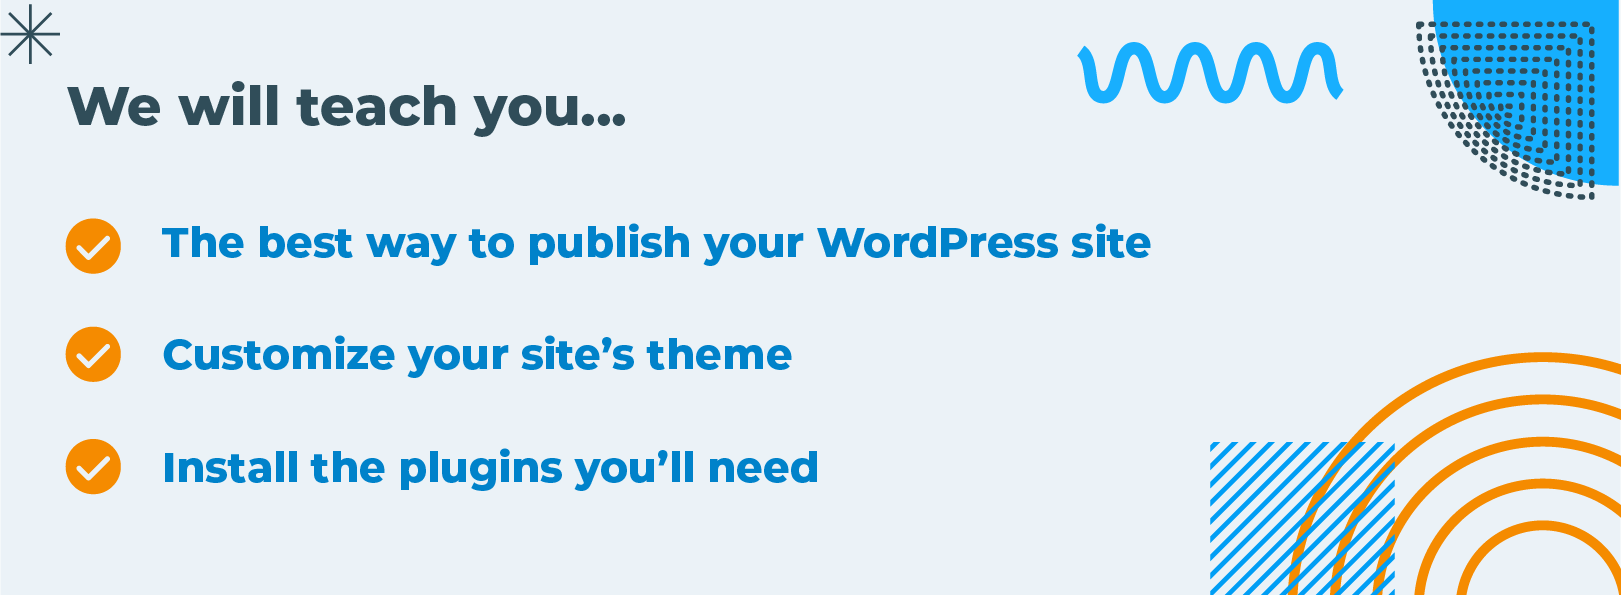 Step-by-Step Guide: How to Publish Your WordPress Site Easily and Effectively